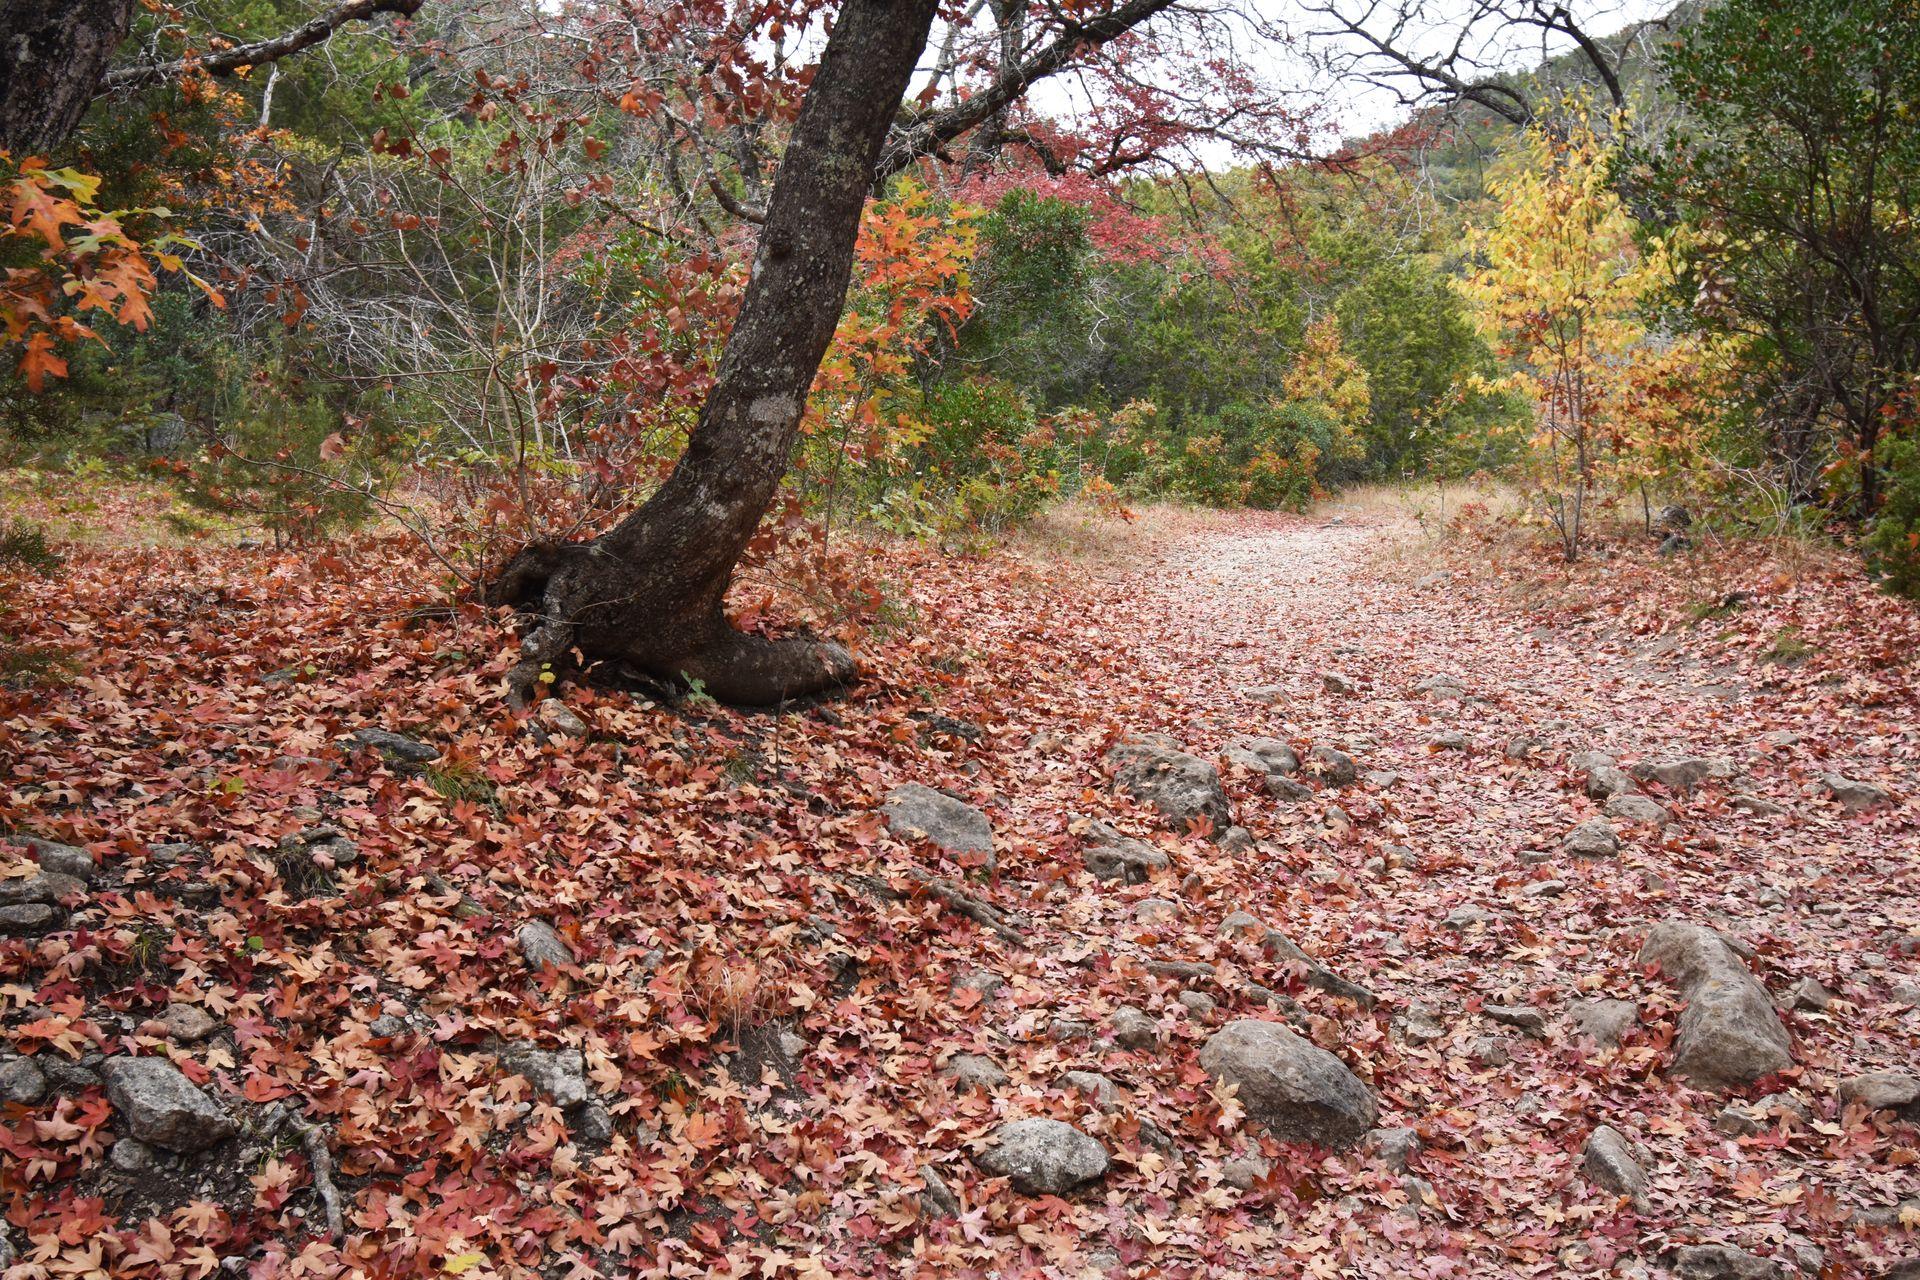 A trail covered in fallen leaves in Lost Maples State Natural Area